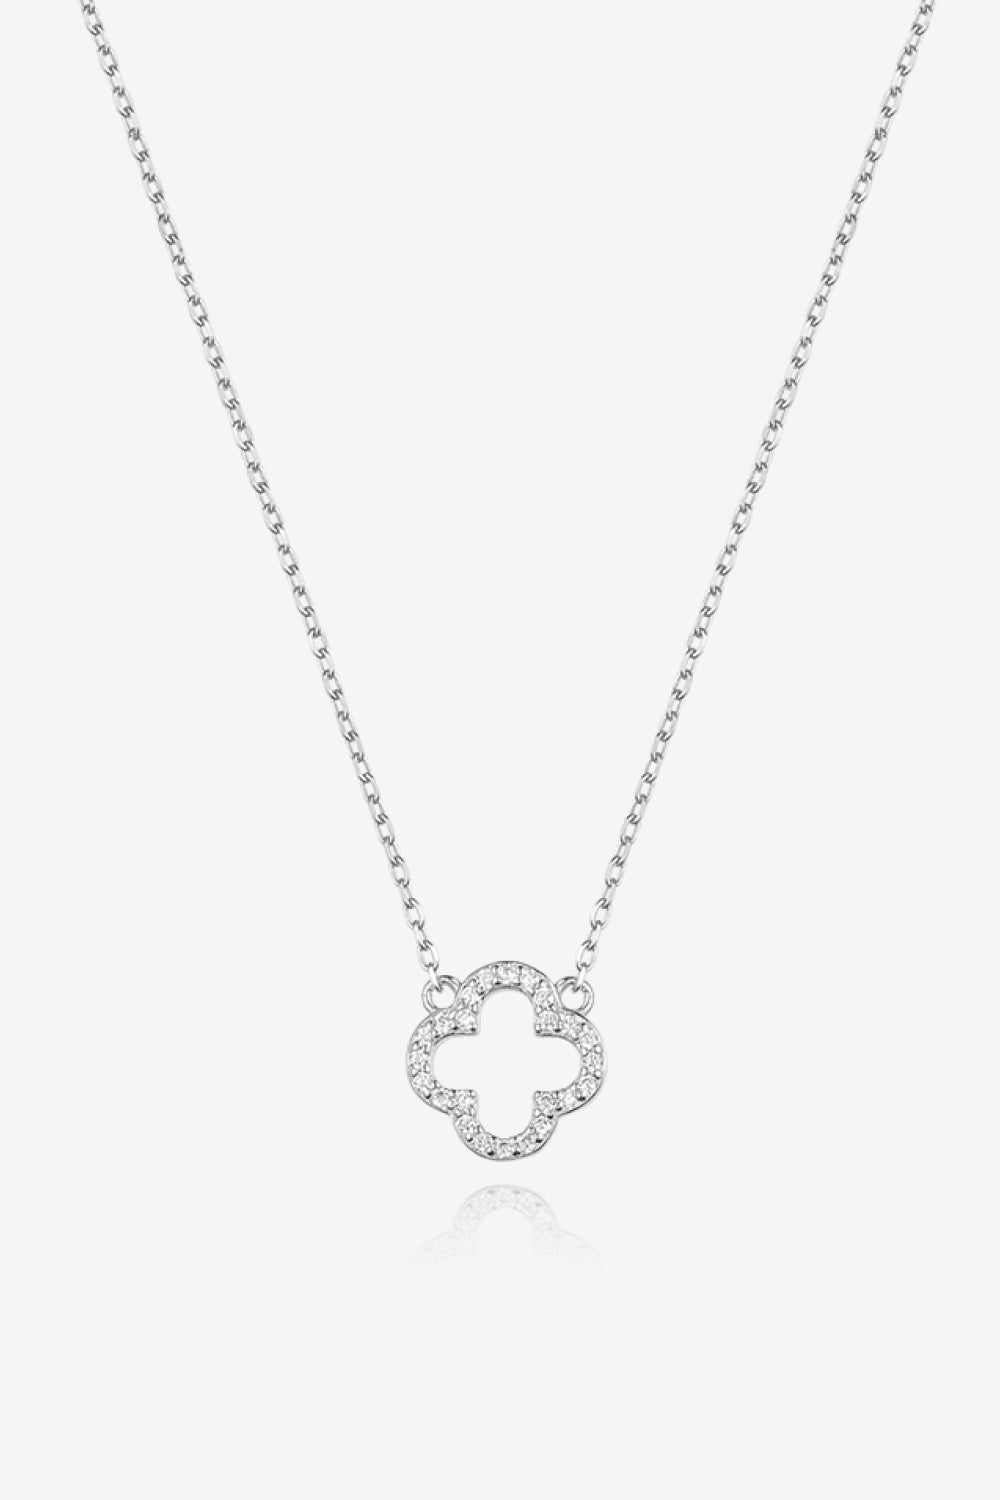 SILVER ONE SIZE - Inlaid Cubic Zirconia 925 Sterling Silver Necklace - 2 options - necklace at TFC&H Co.